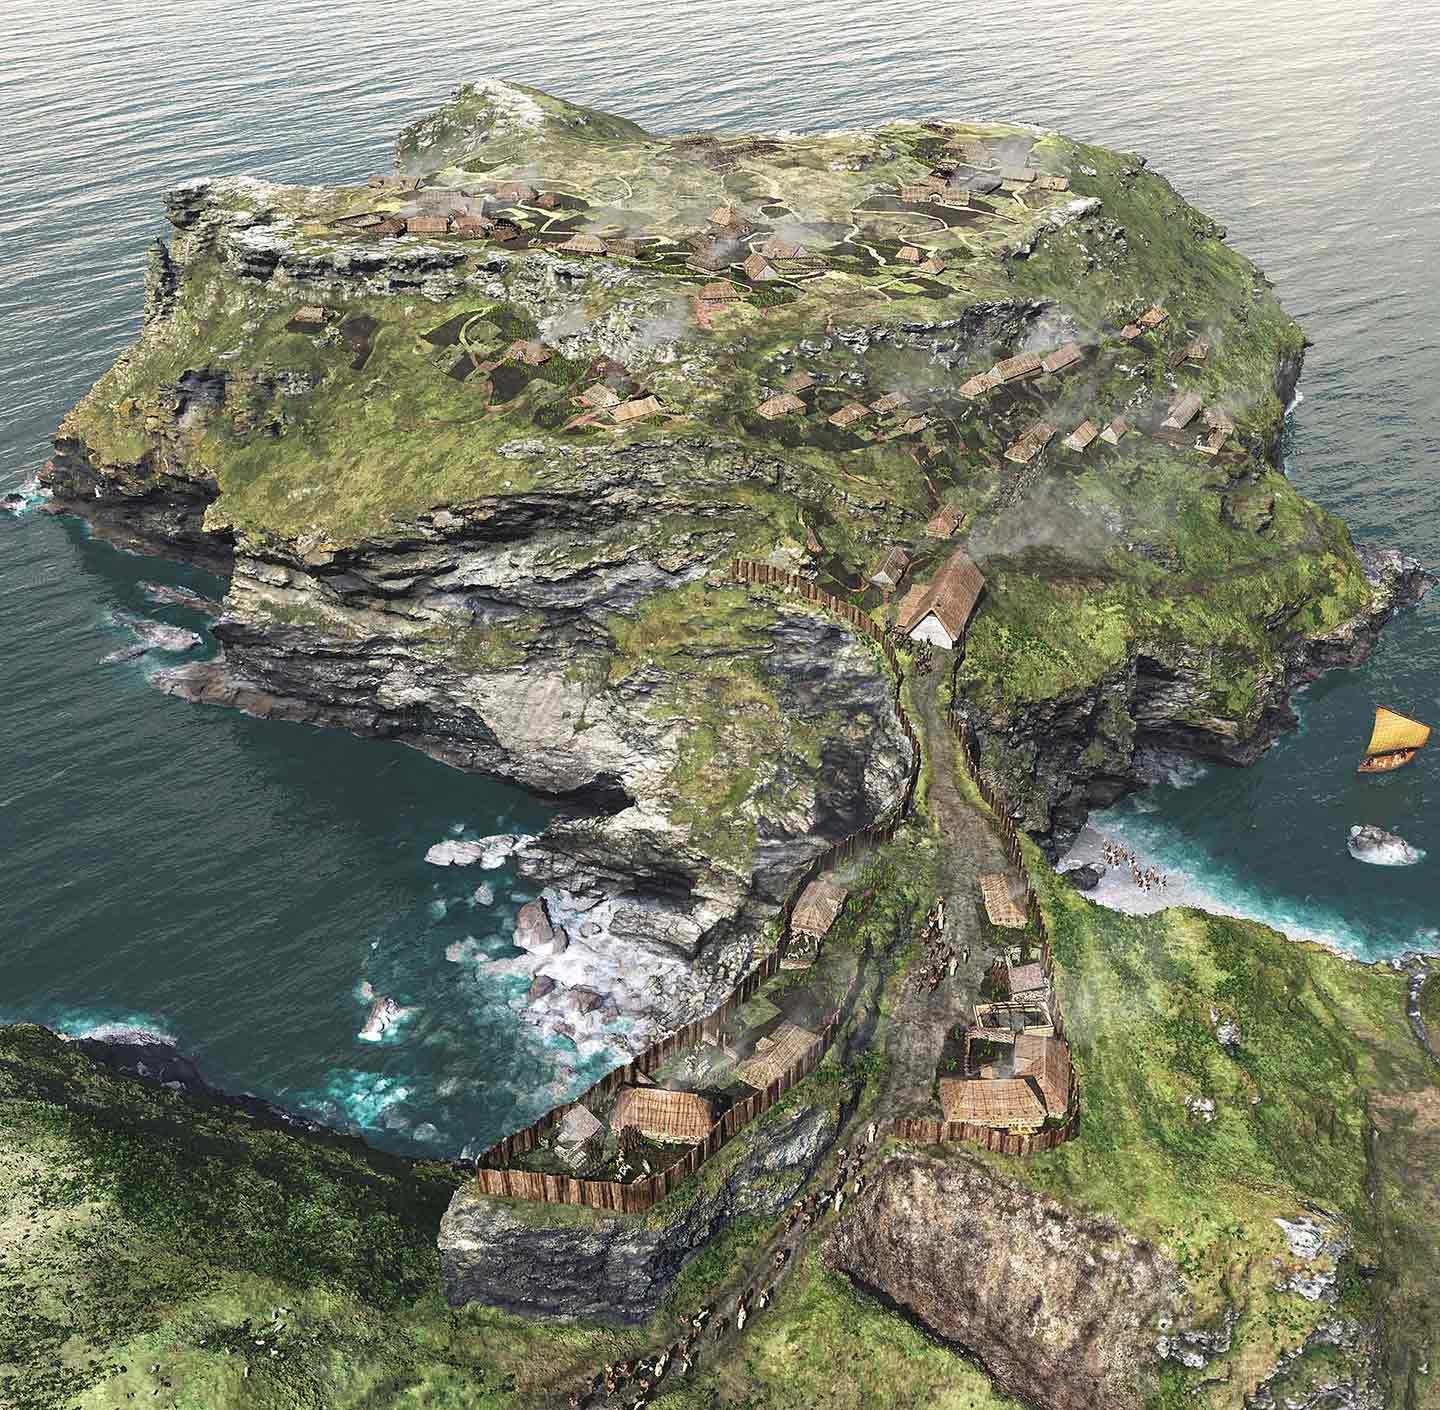 A reconstruction of Tintagel as it may have looked in about 700, showing the island dotted with simple houses